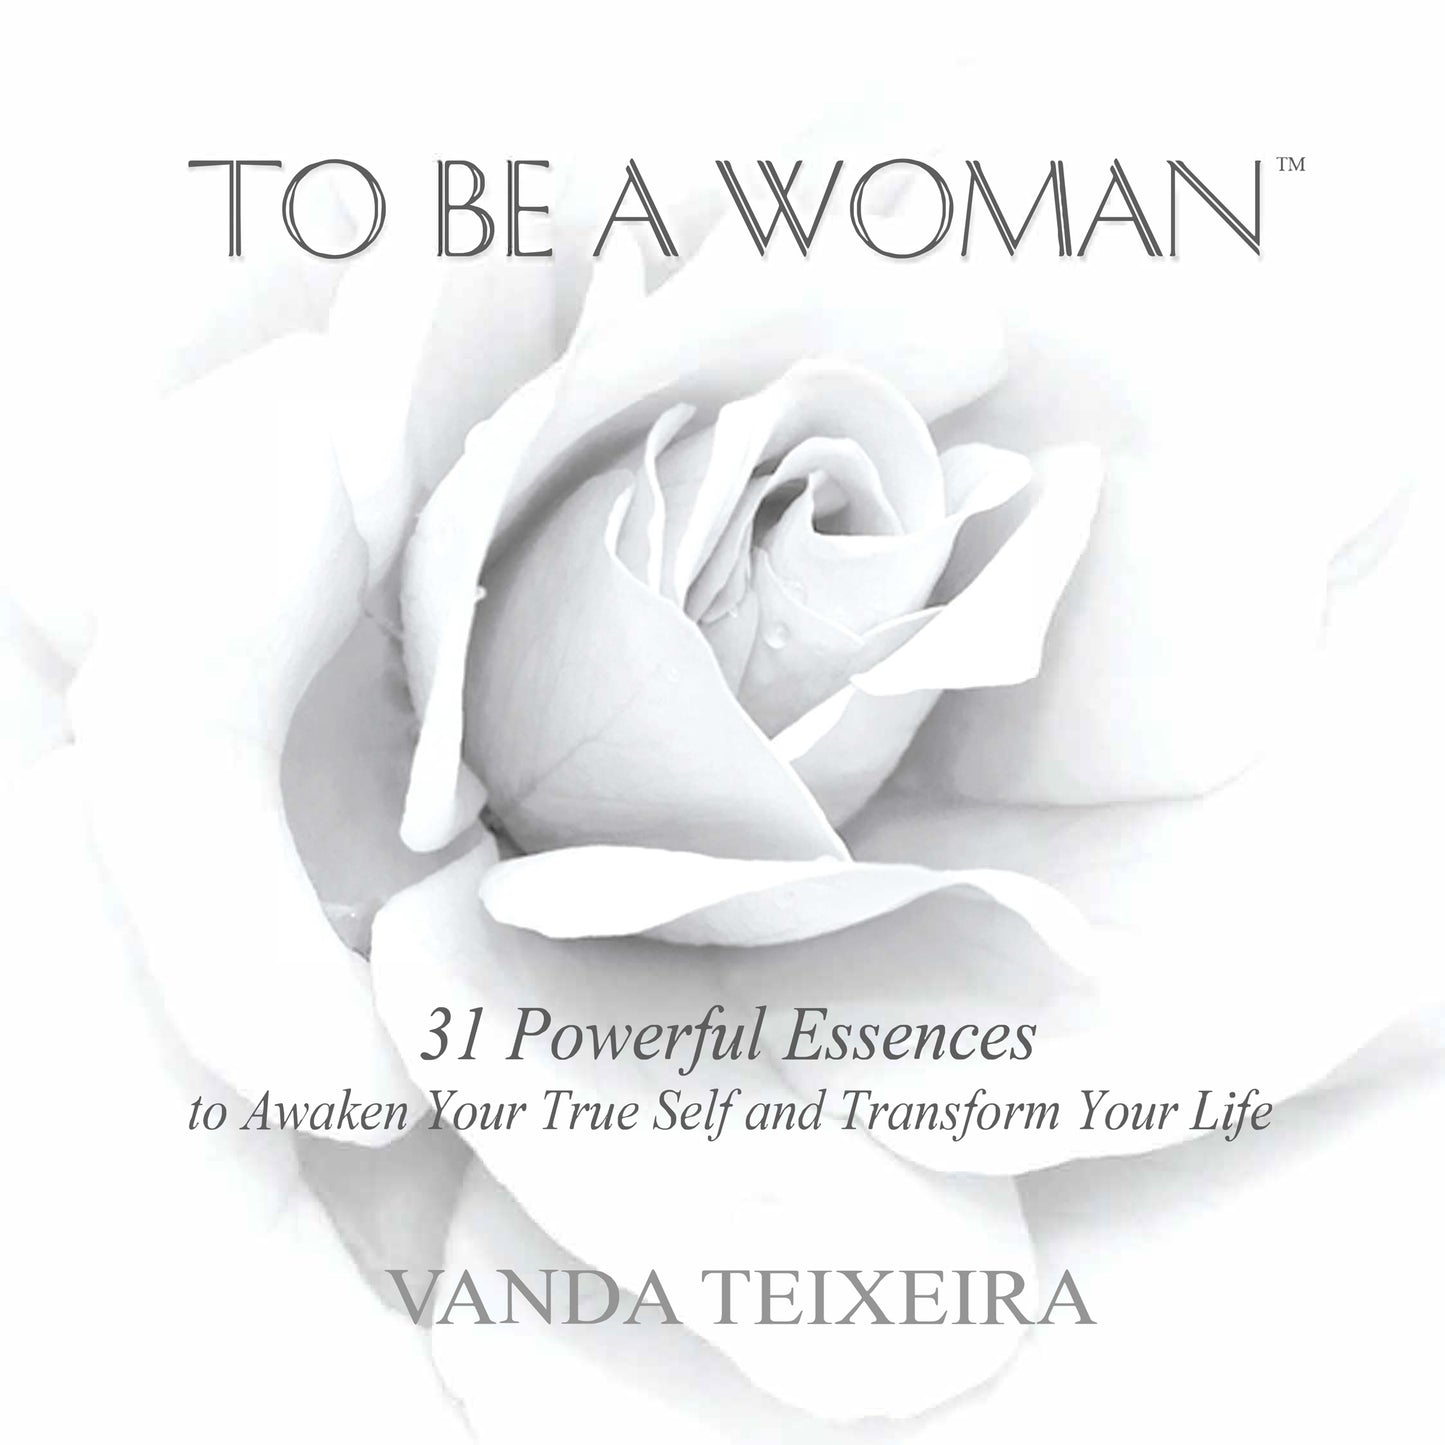 To Be A Women™ 31 Essences Book (Paperback)